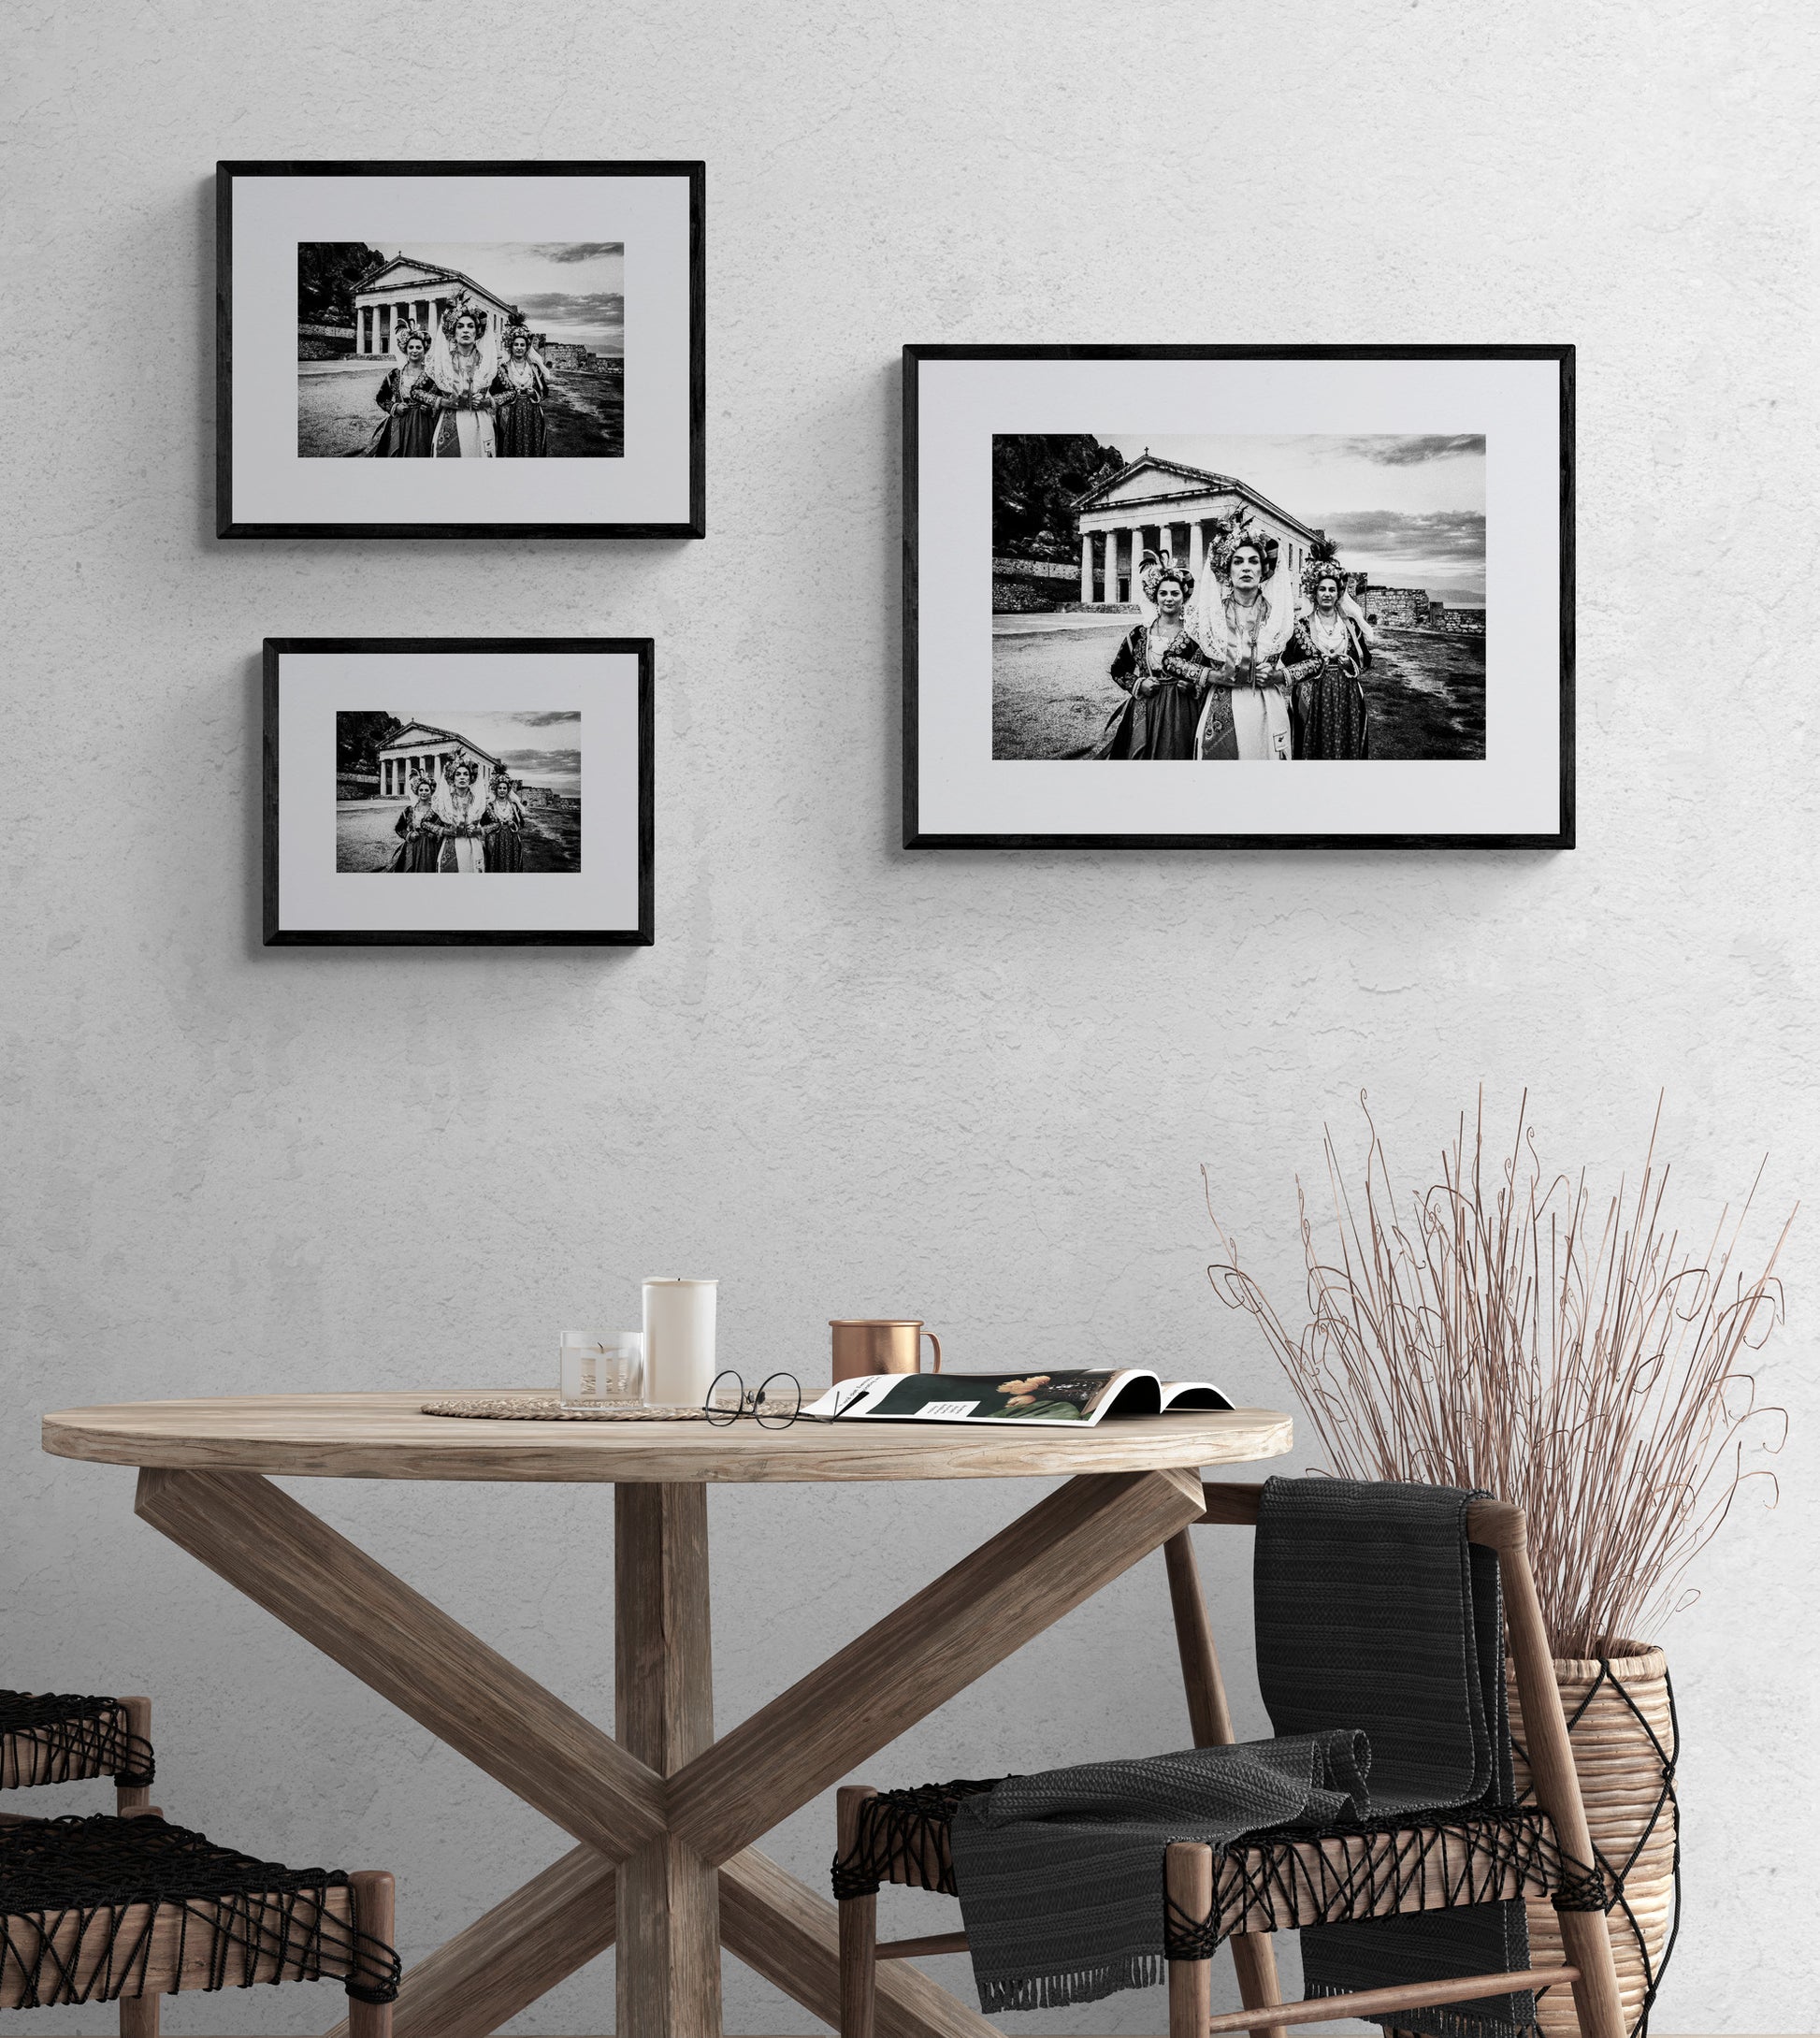 Black and White Photography Wall Art Greece | Costumes of central Corfu island at the Old Fortress Ionian Sea by George Tatakis - framing options